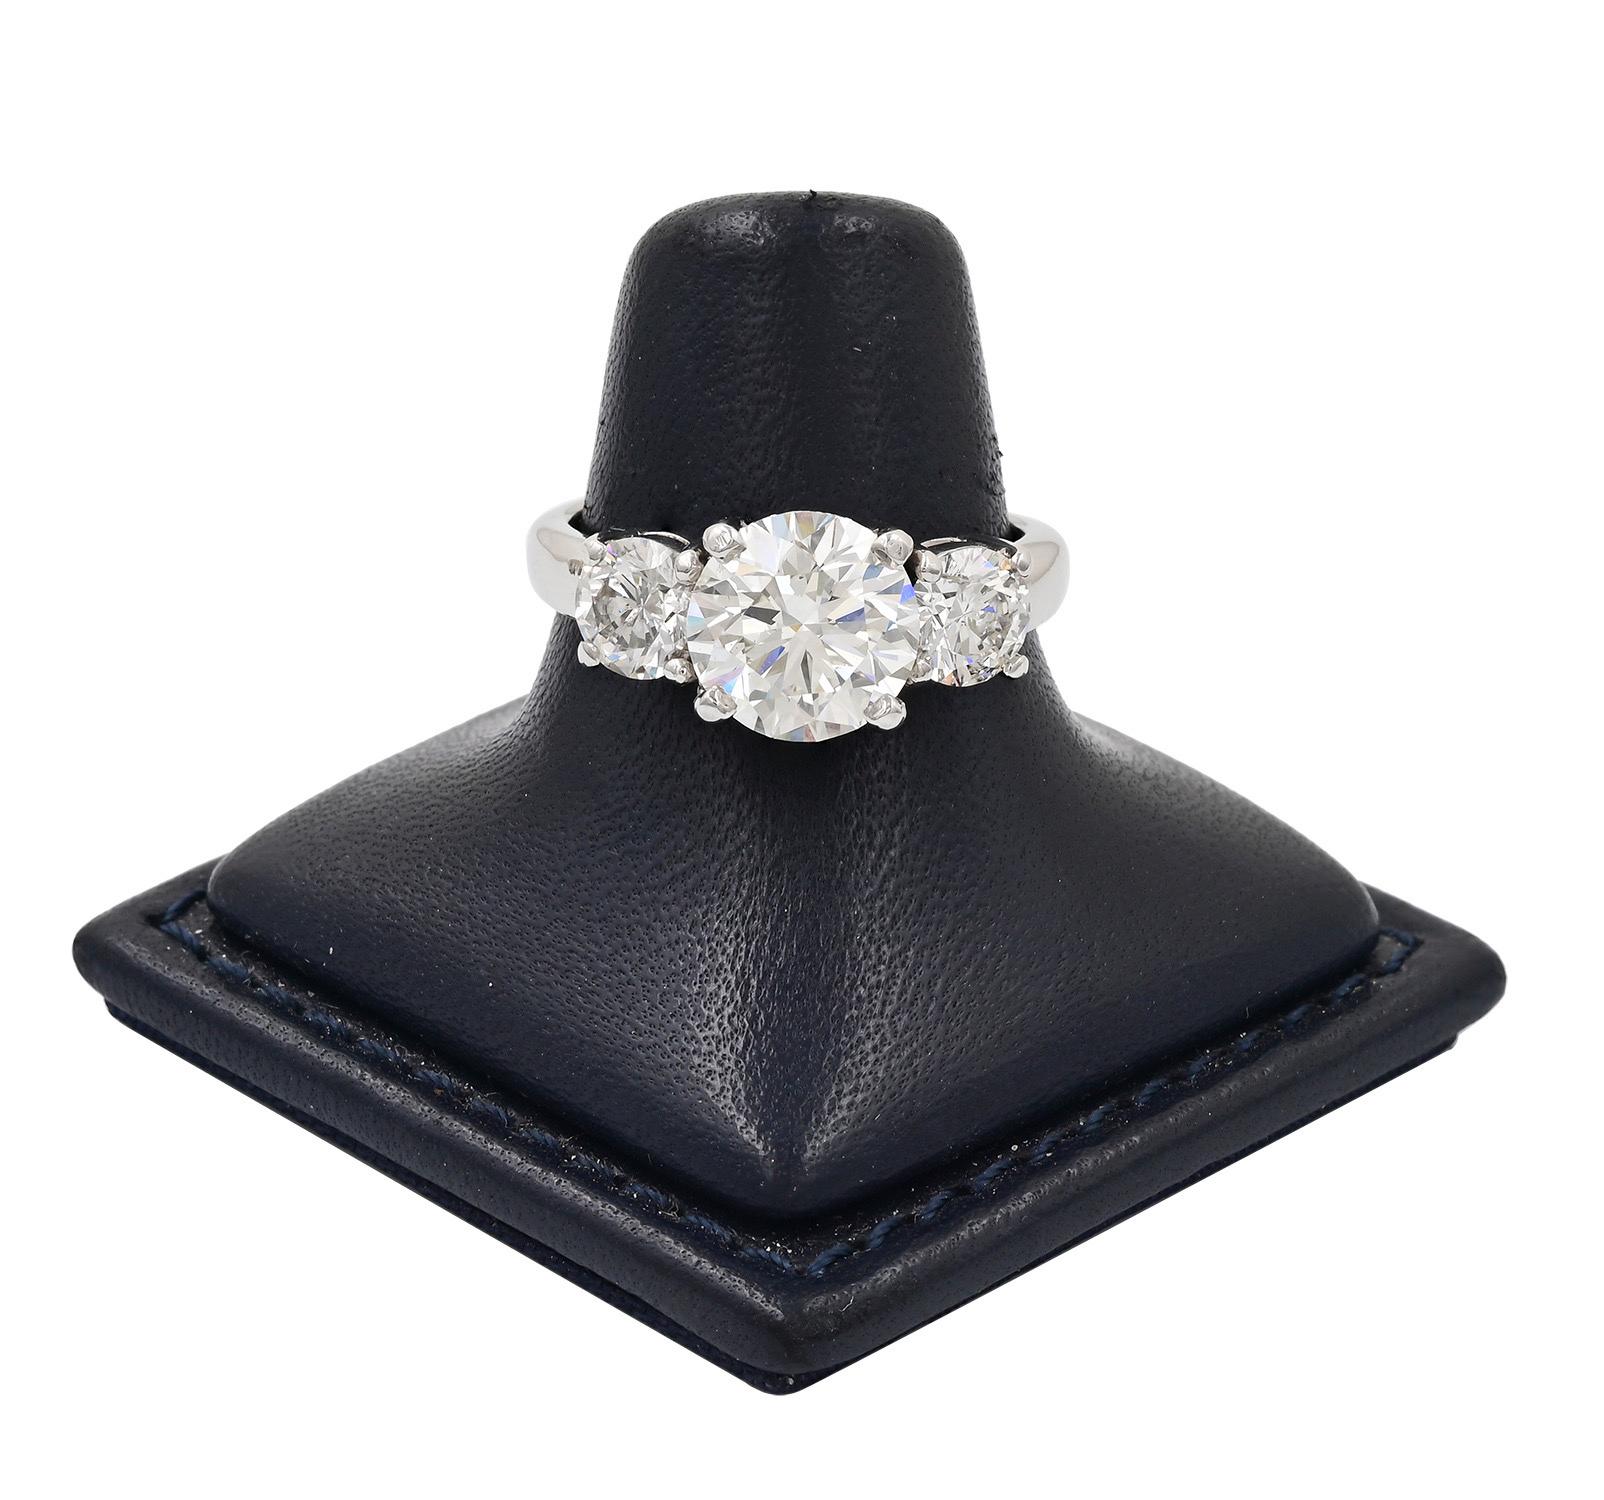 This beautiful engagement ring consists of 2.50 carat center stone graded by the GIA as near colorless and has a clarity of slightly included one.
Mounted with a perfect match round brilliant cuts weighing 1.01 carat total 
We at issac nussbaum